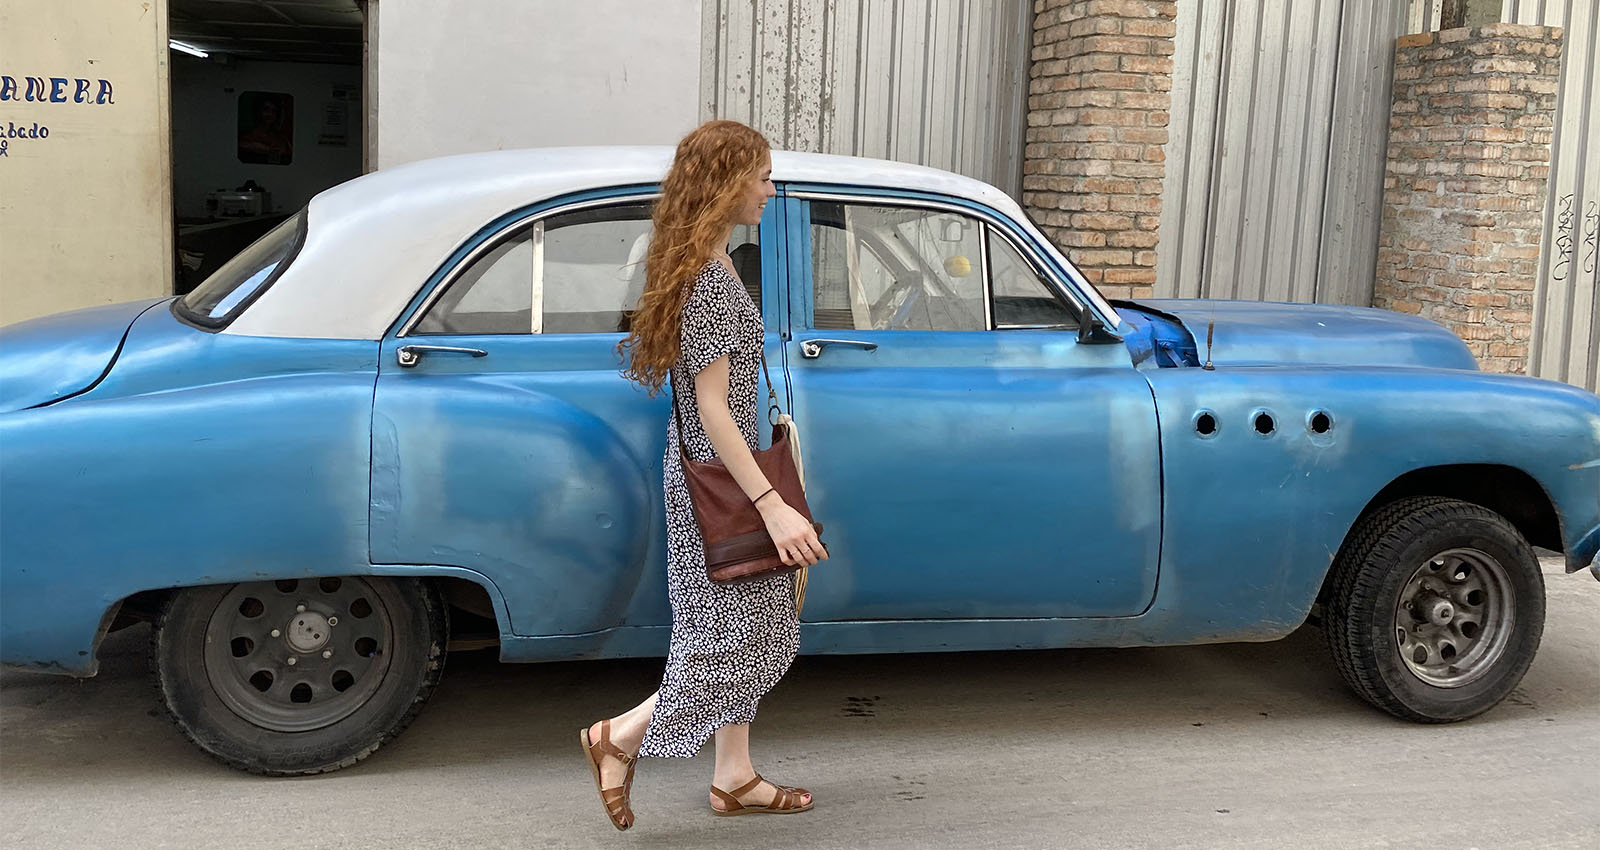 A lady in a long dress with long red hair walks past a blue and white vintage car 